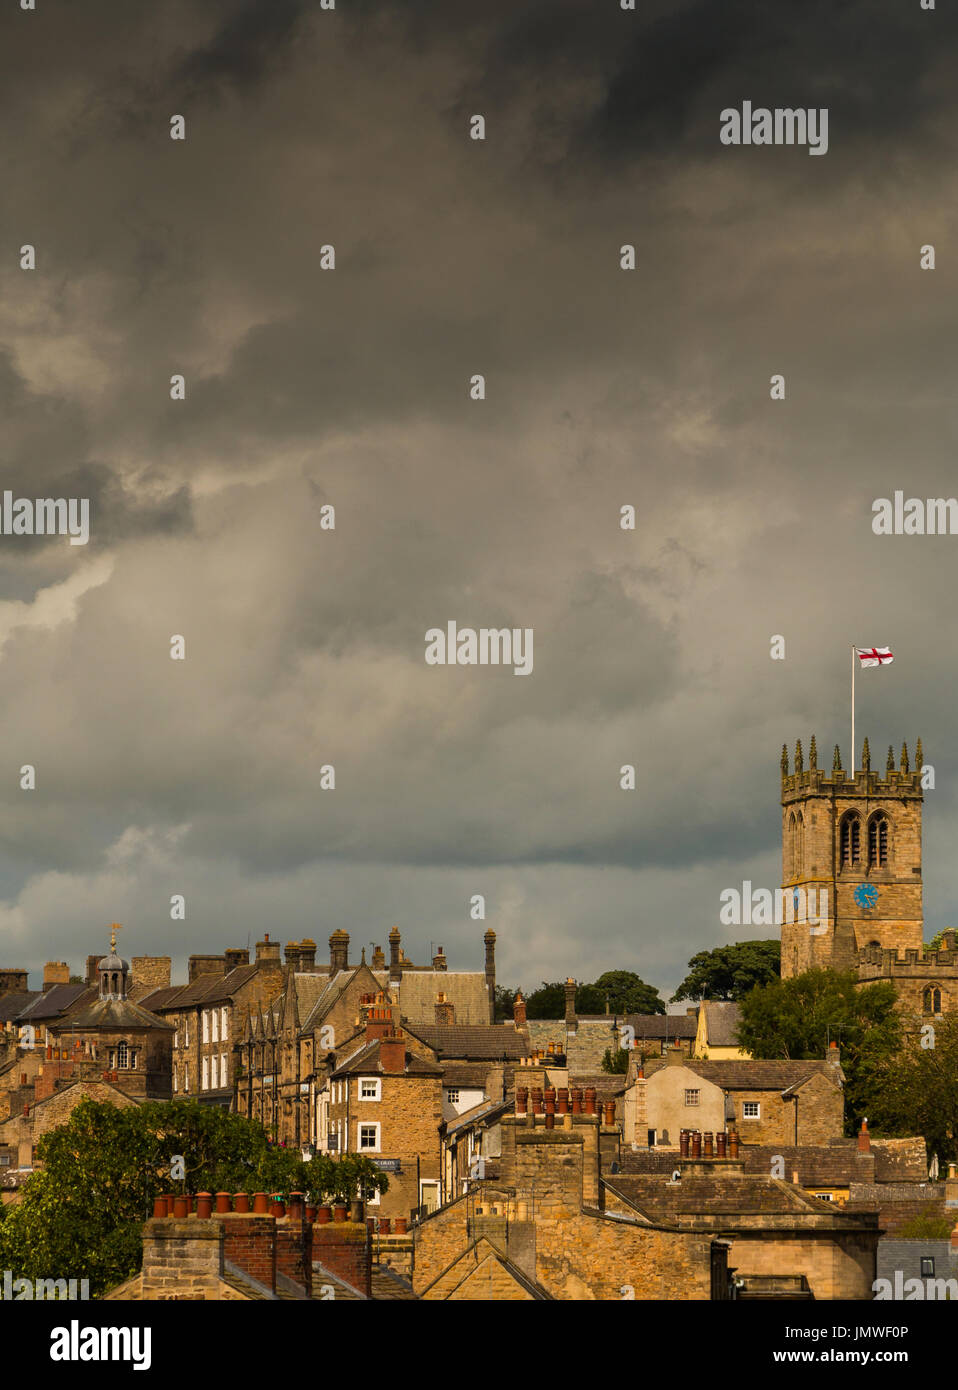 Barnard Castle, Teesdale, UK - roofscape against a stormy sky July 2017 with copy space Stock Photo